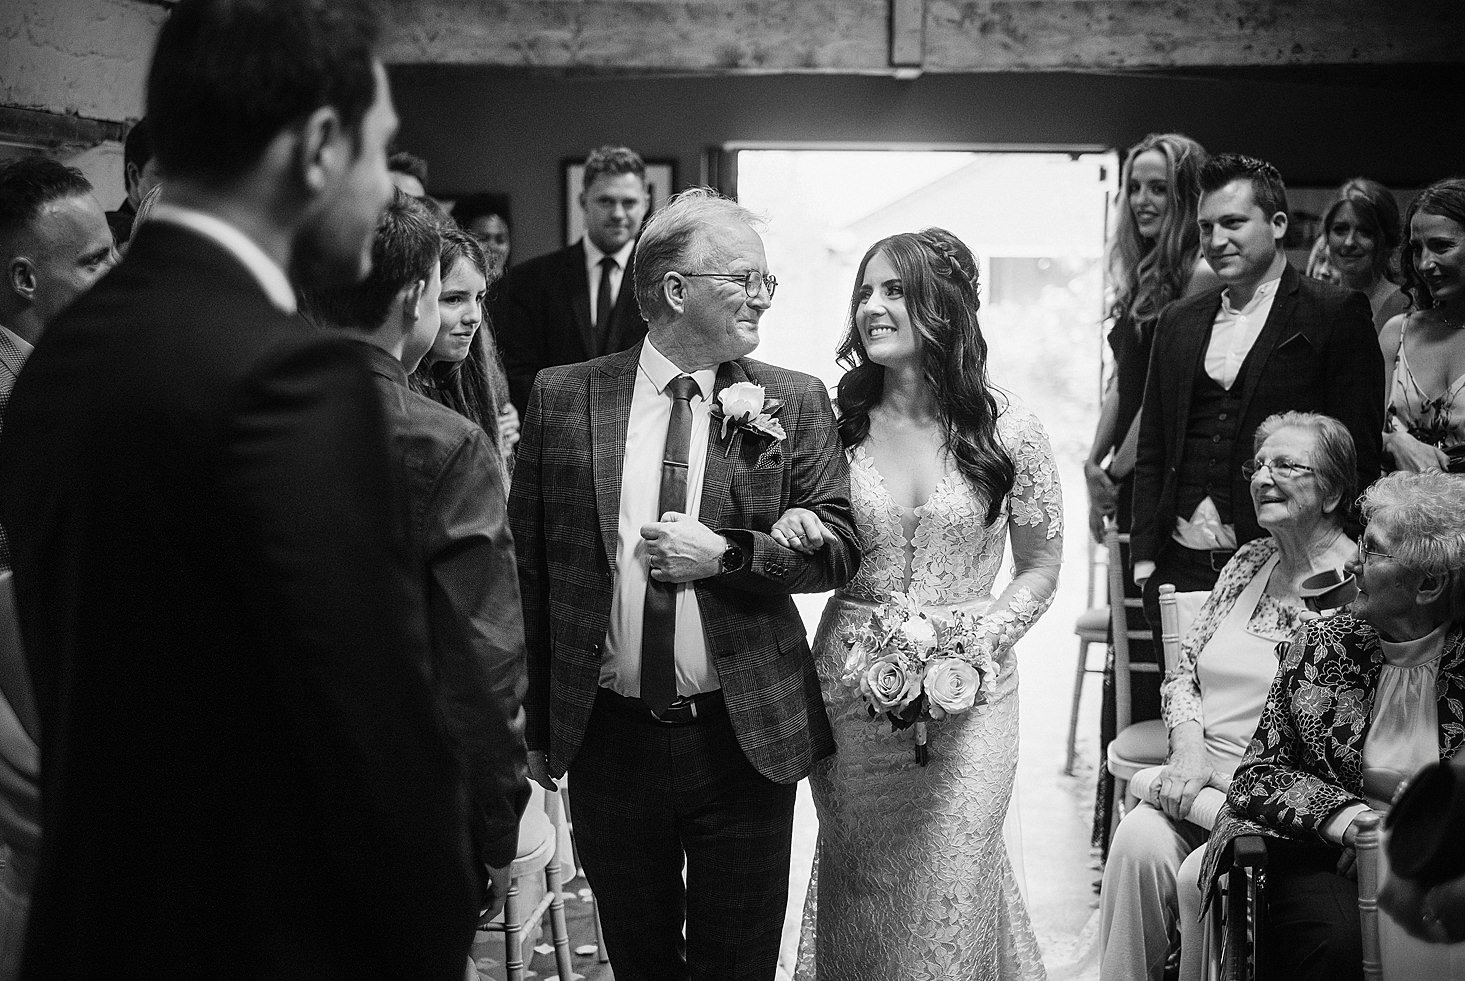 Walking his daughter down the aisle was one of the proudest moments of his life.

#wedding #weddings #weddingday #photo #photography #photographer #weddingphotography #weddingphotographer #northeastphotography #northeastwedding #northeastweddings #no